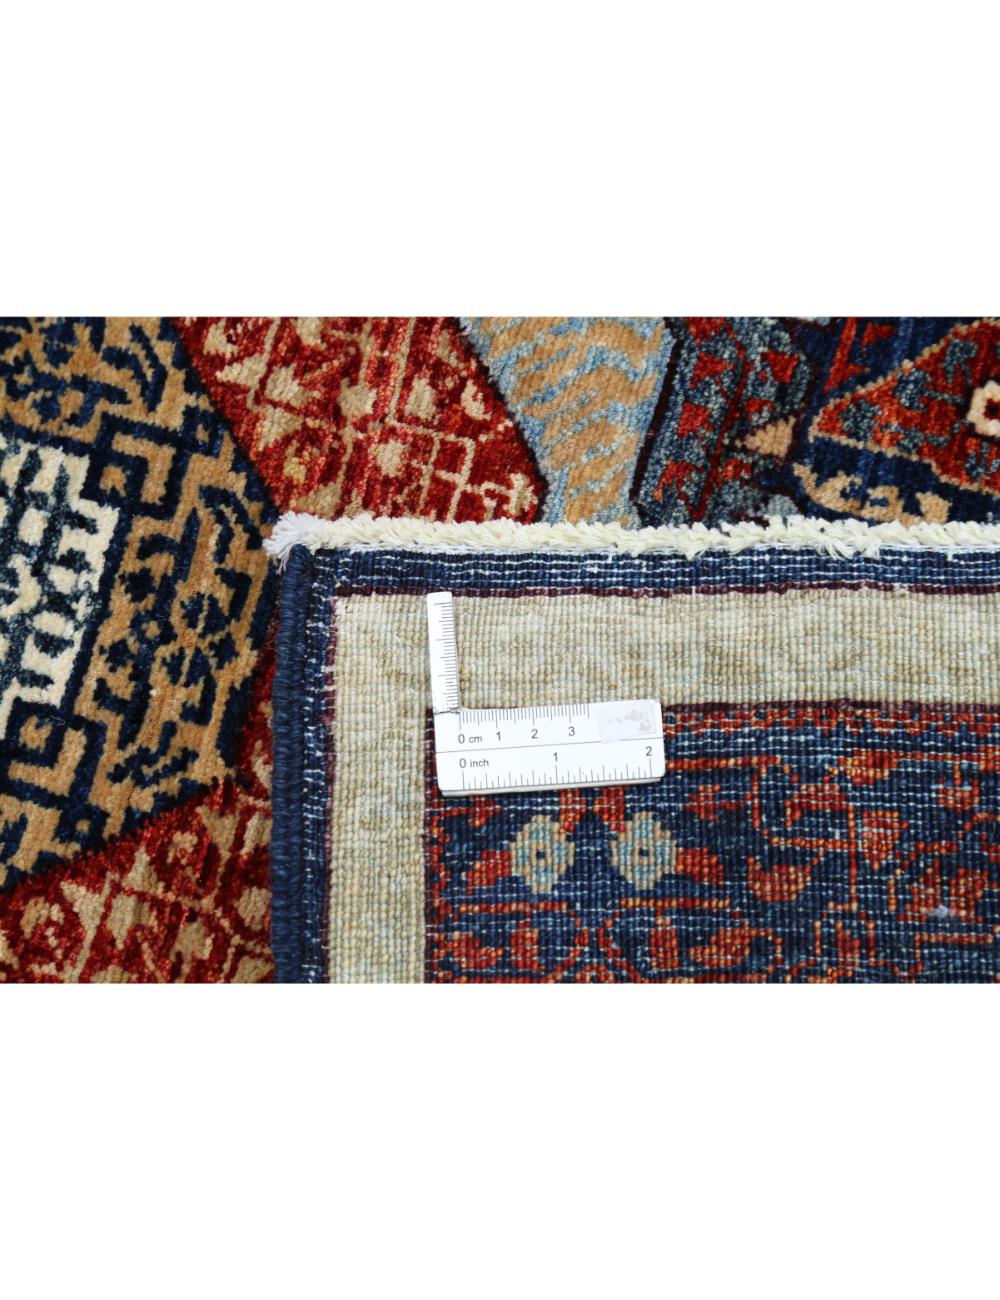 Mamluk 4' 1" X 6' 5" Hand-Knotted Wool Rug 4' 1" X 6' 5" (124 X 196) / Blue / Red